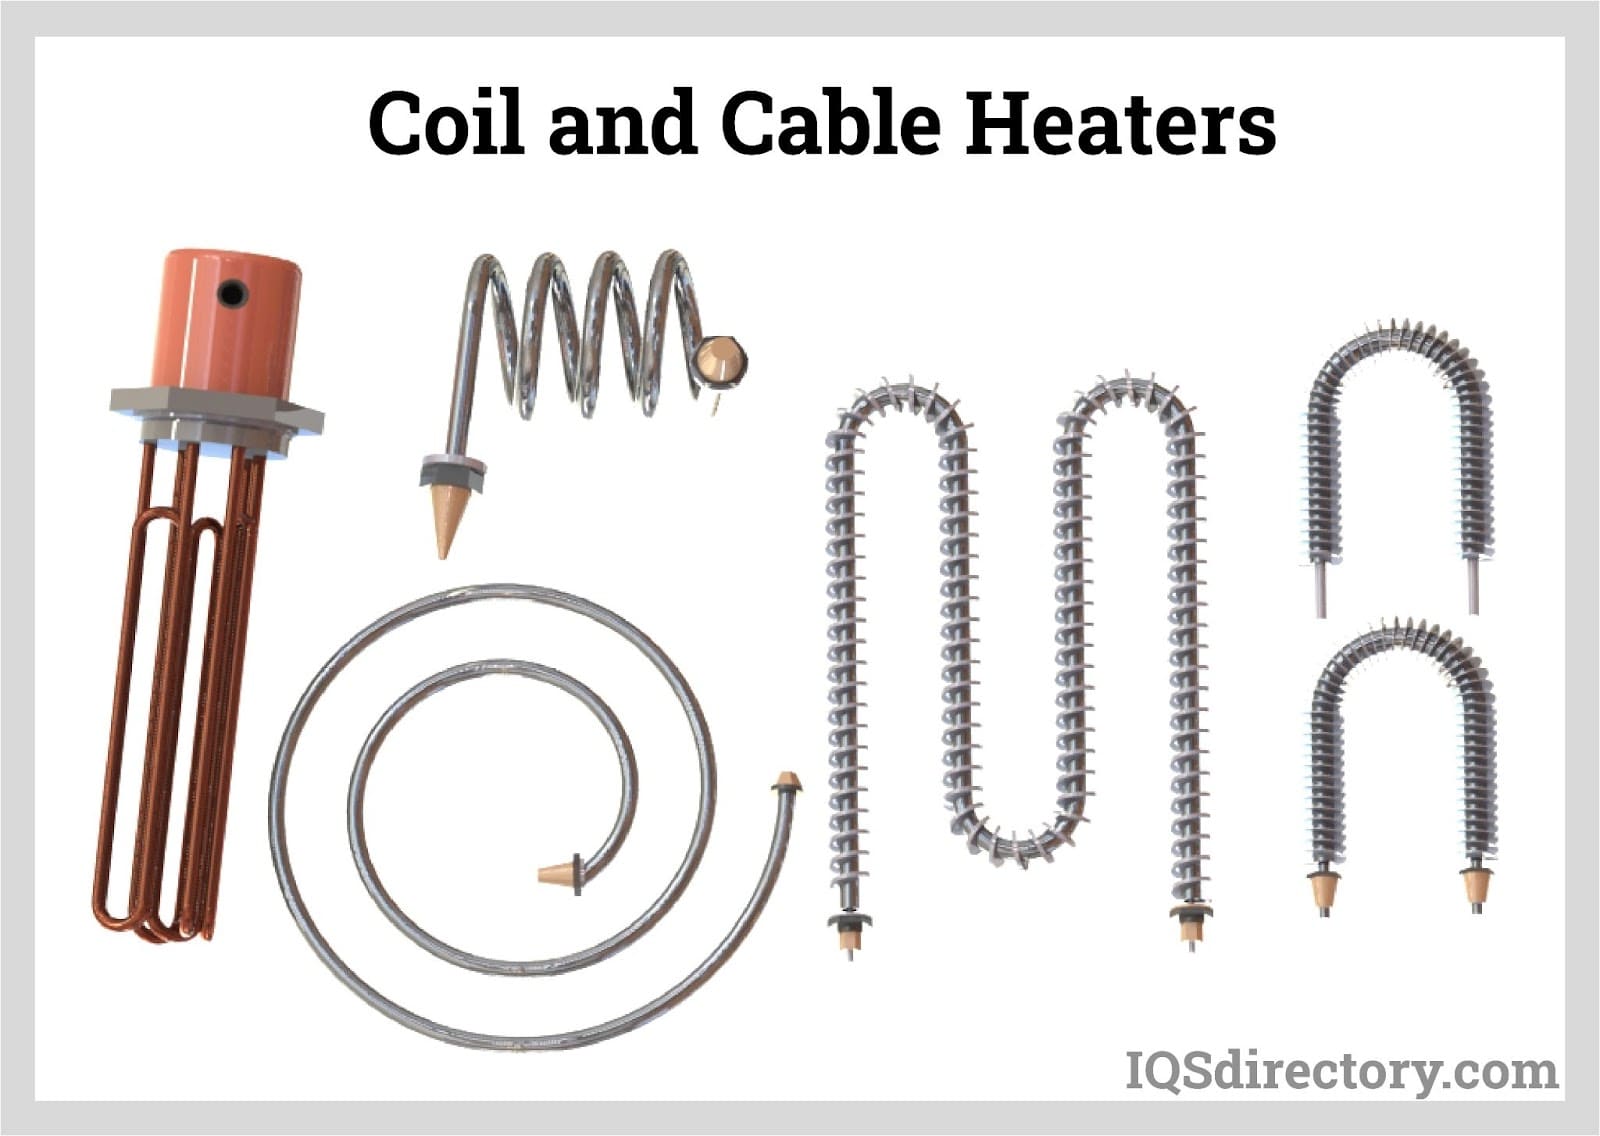 Coil and Cable Heaters